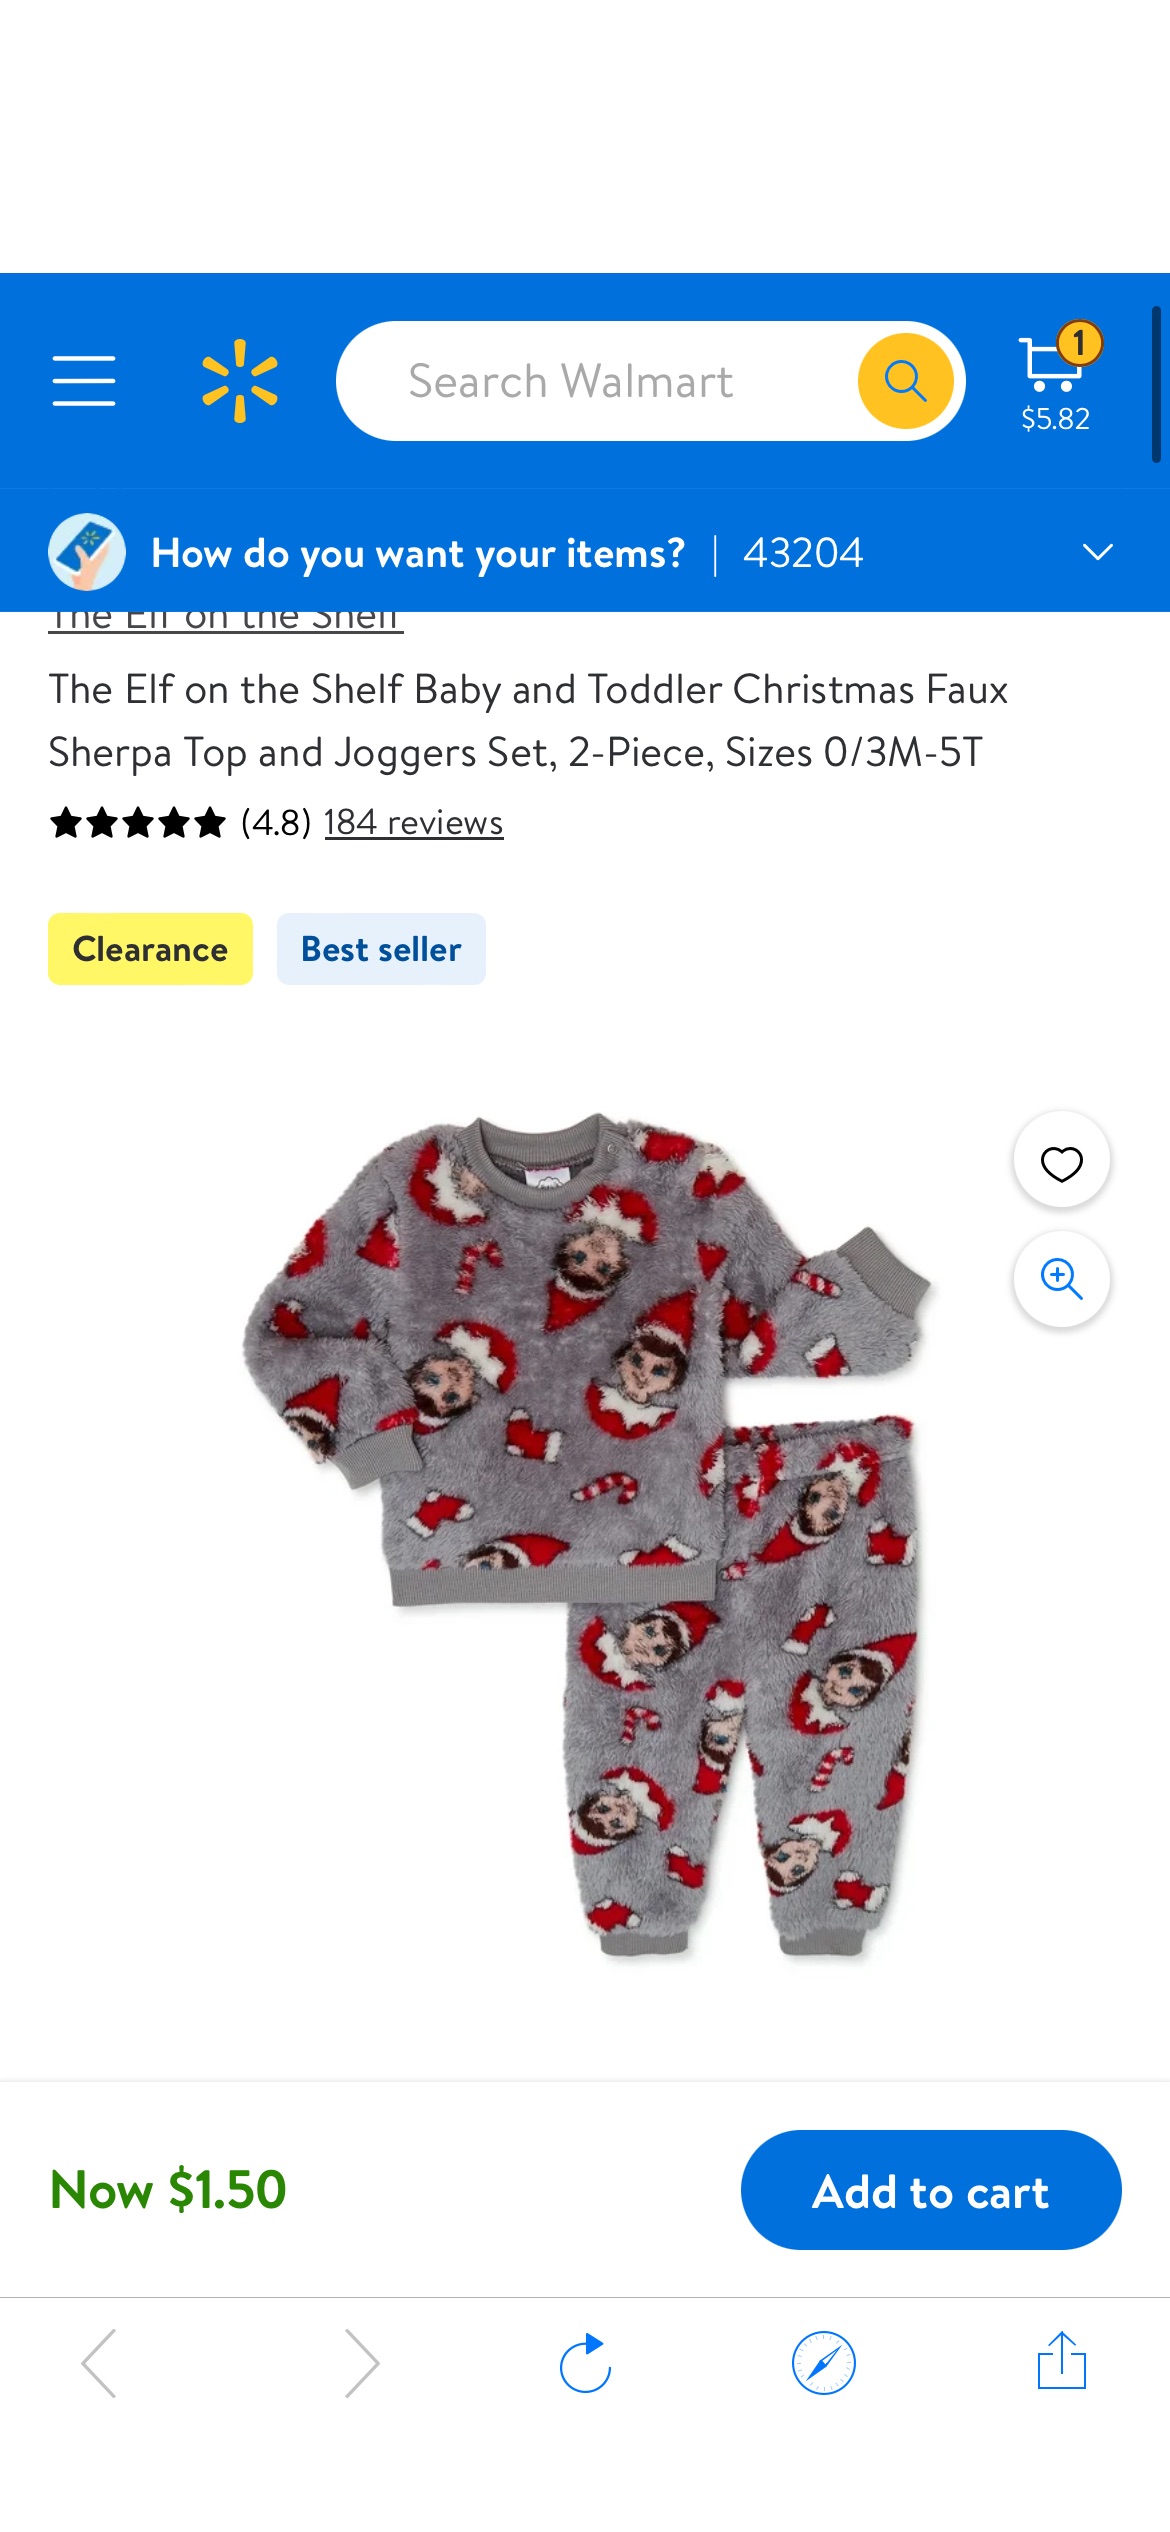 The Elf on the Shelf Baby and Toddler Christmas Faux Sherpa Top and Joggers Set, 2-Piece, Sizes 0/3M-5T - Walmart.com两件套